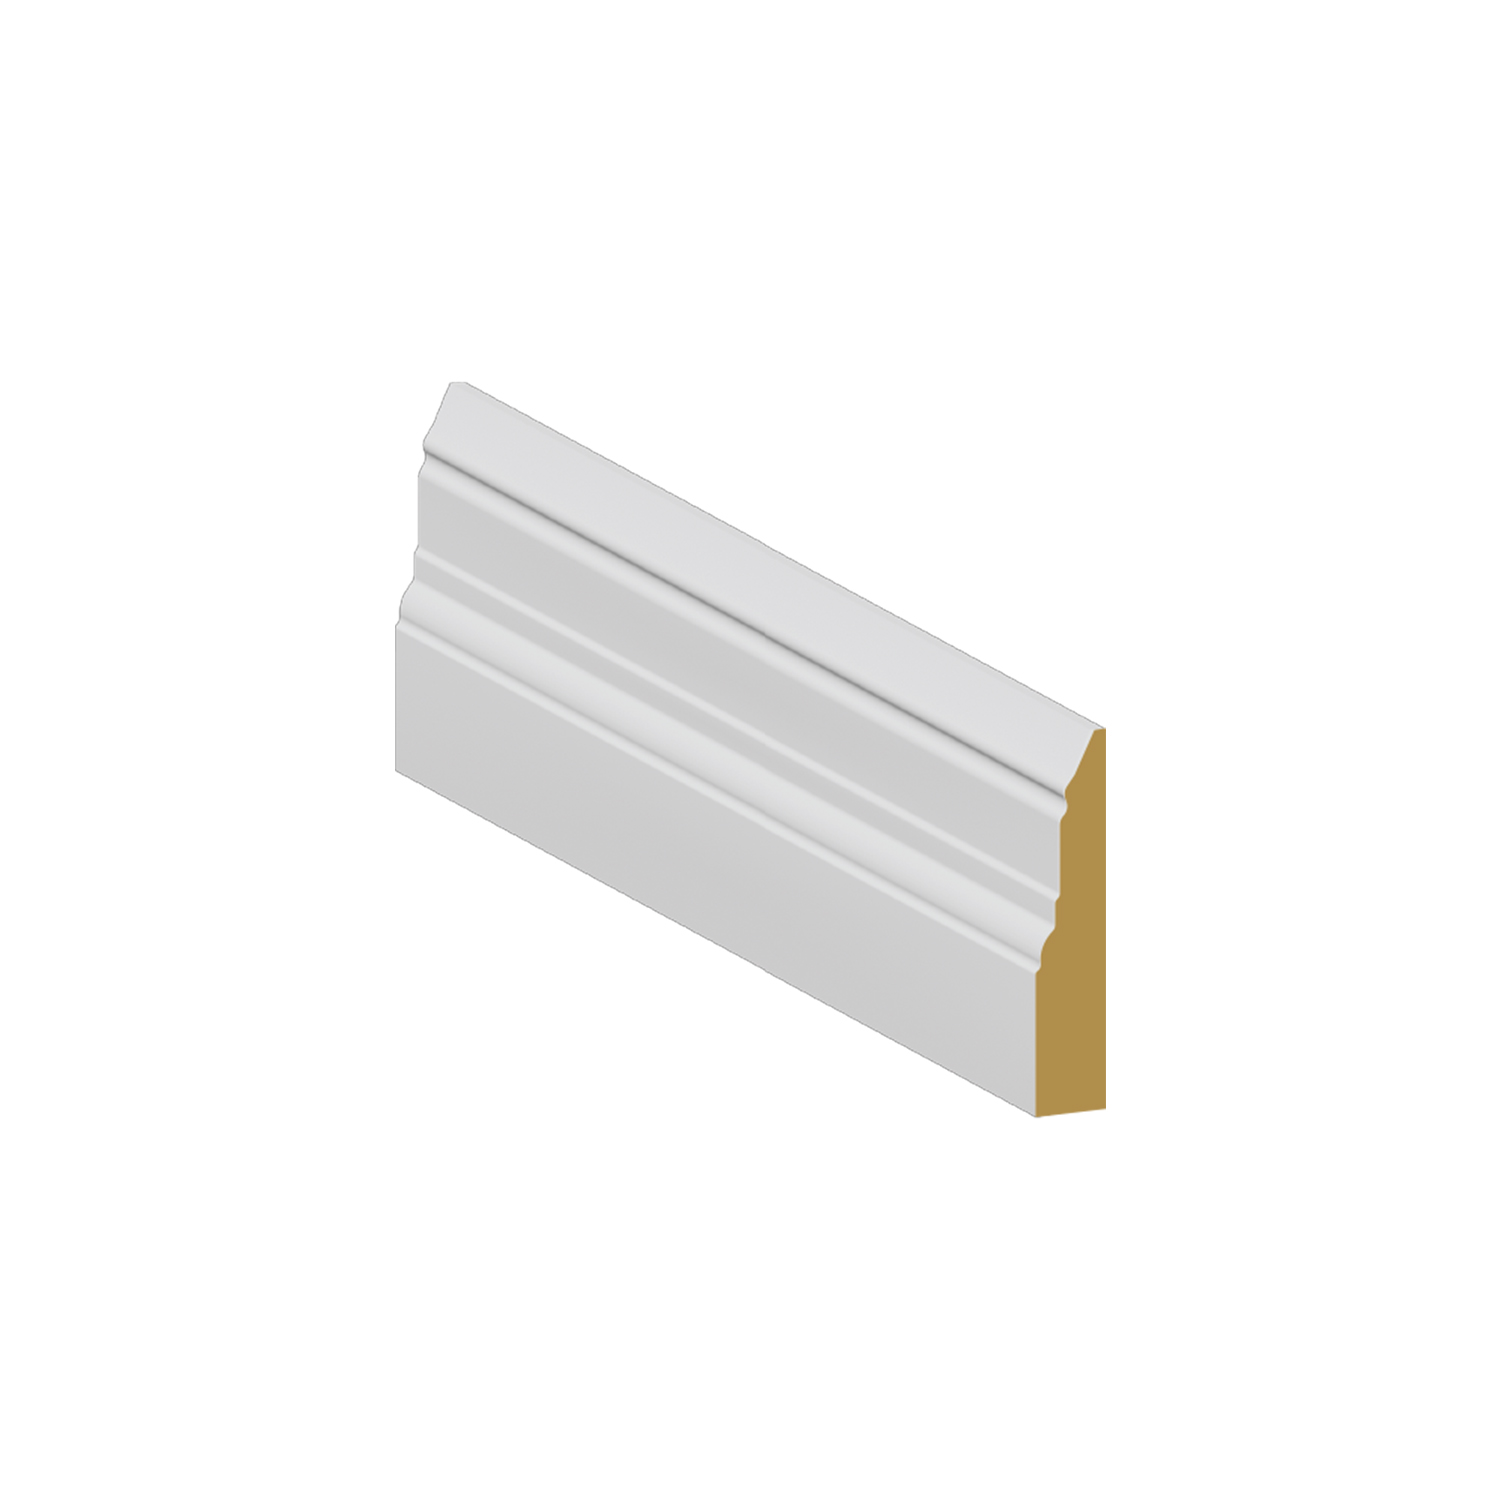 Casing MDF Contemporary Step 2 3/4 x 5/8 x 7' - $0.92/LF - SOLD PER PIECE - EACH PIECE IS 7' - $6.50 EACH